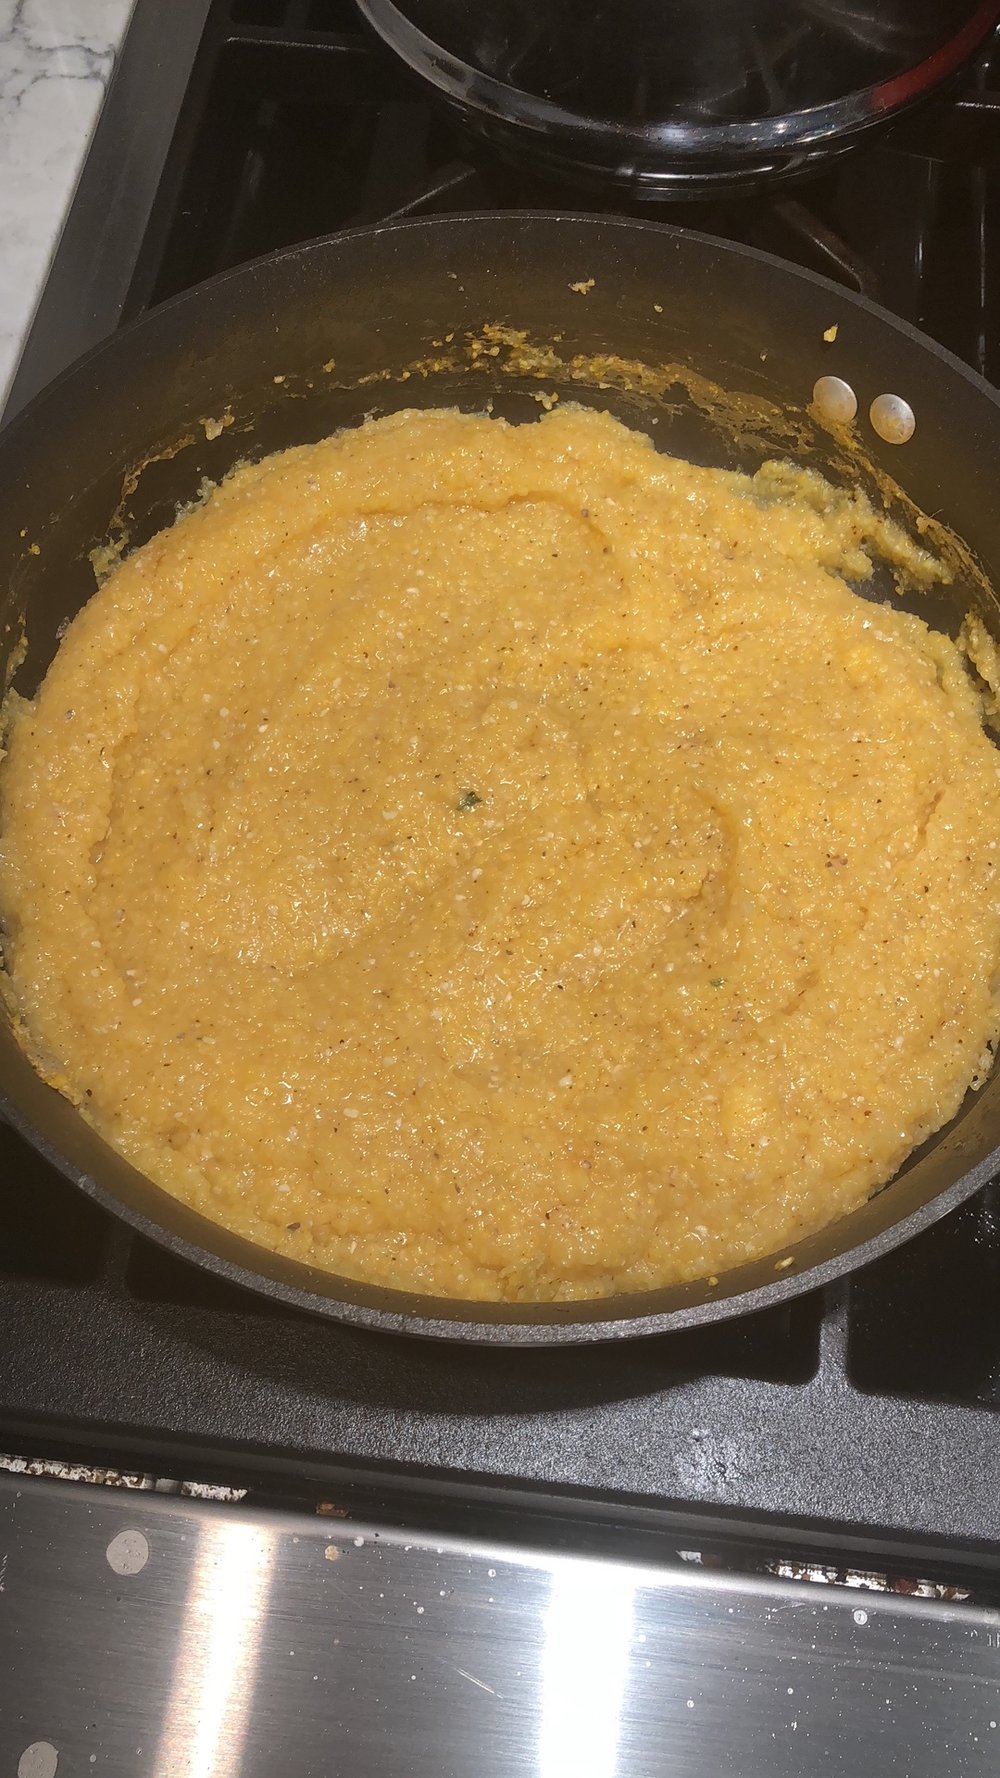 Continue to stir until Polenta is soft and cooked thru. Taste again to see if you need additional seasoning.